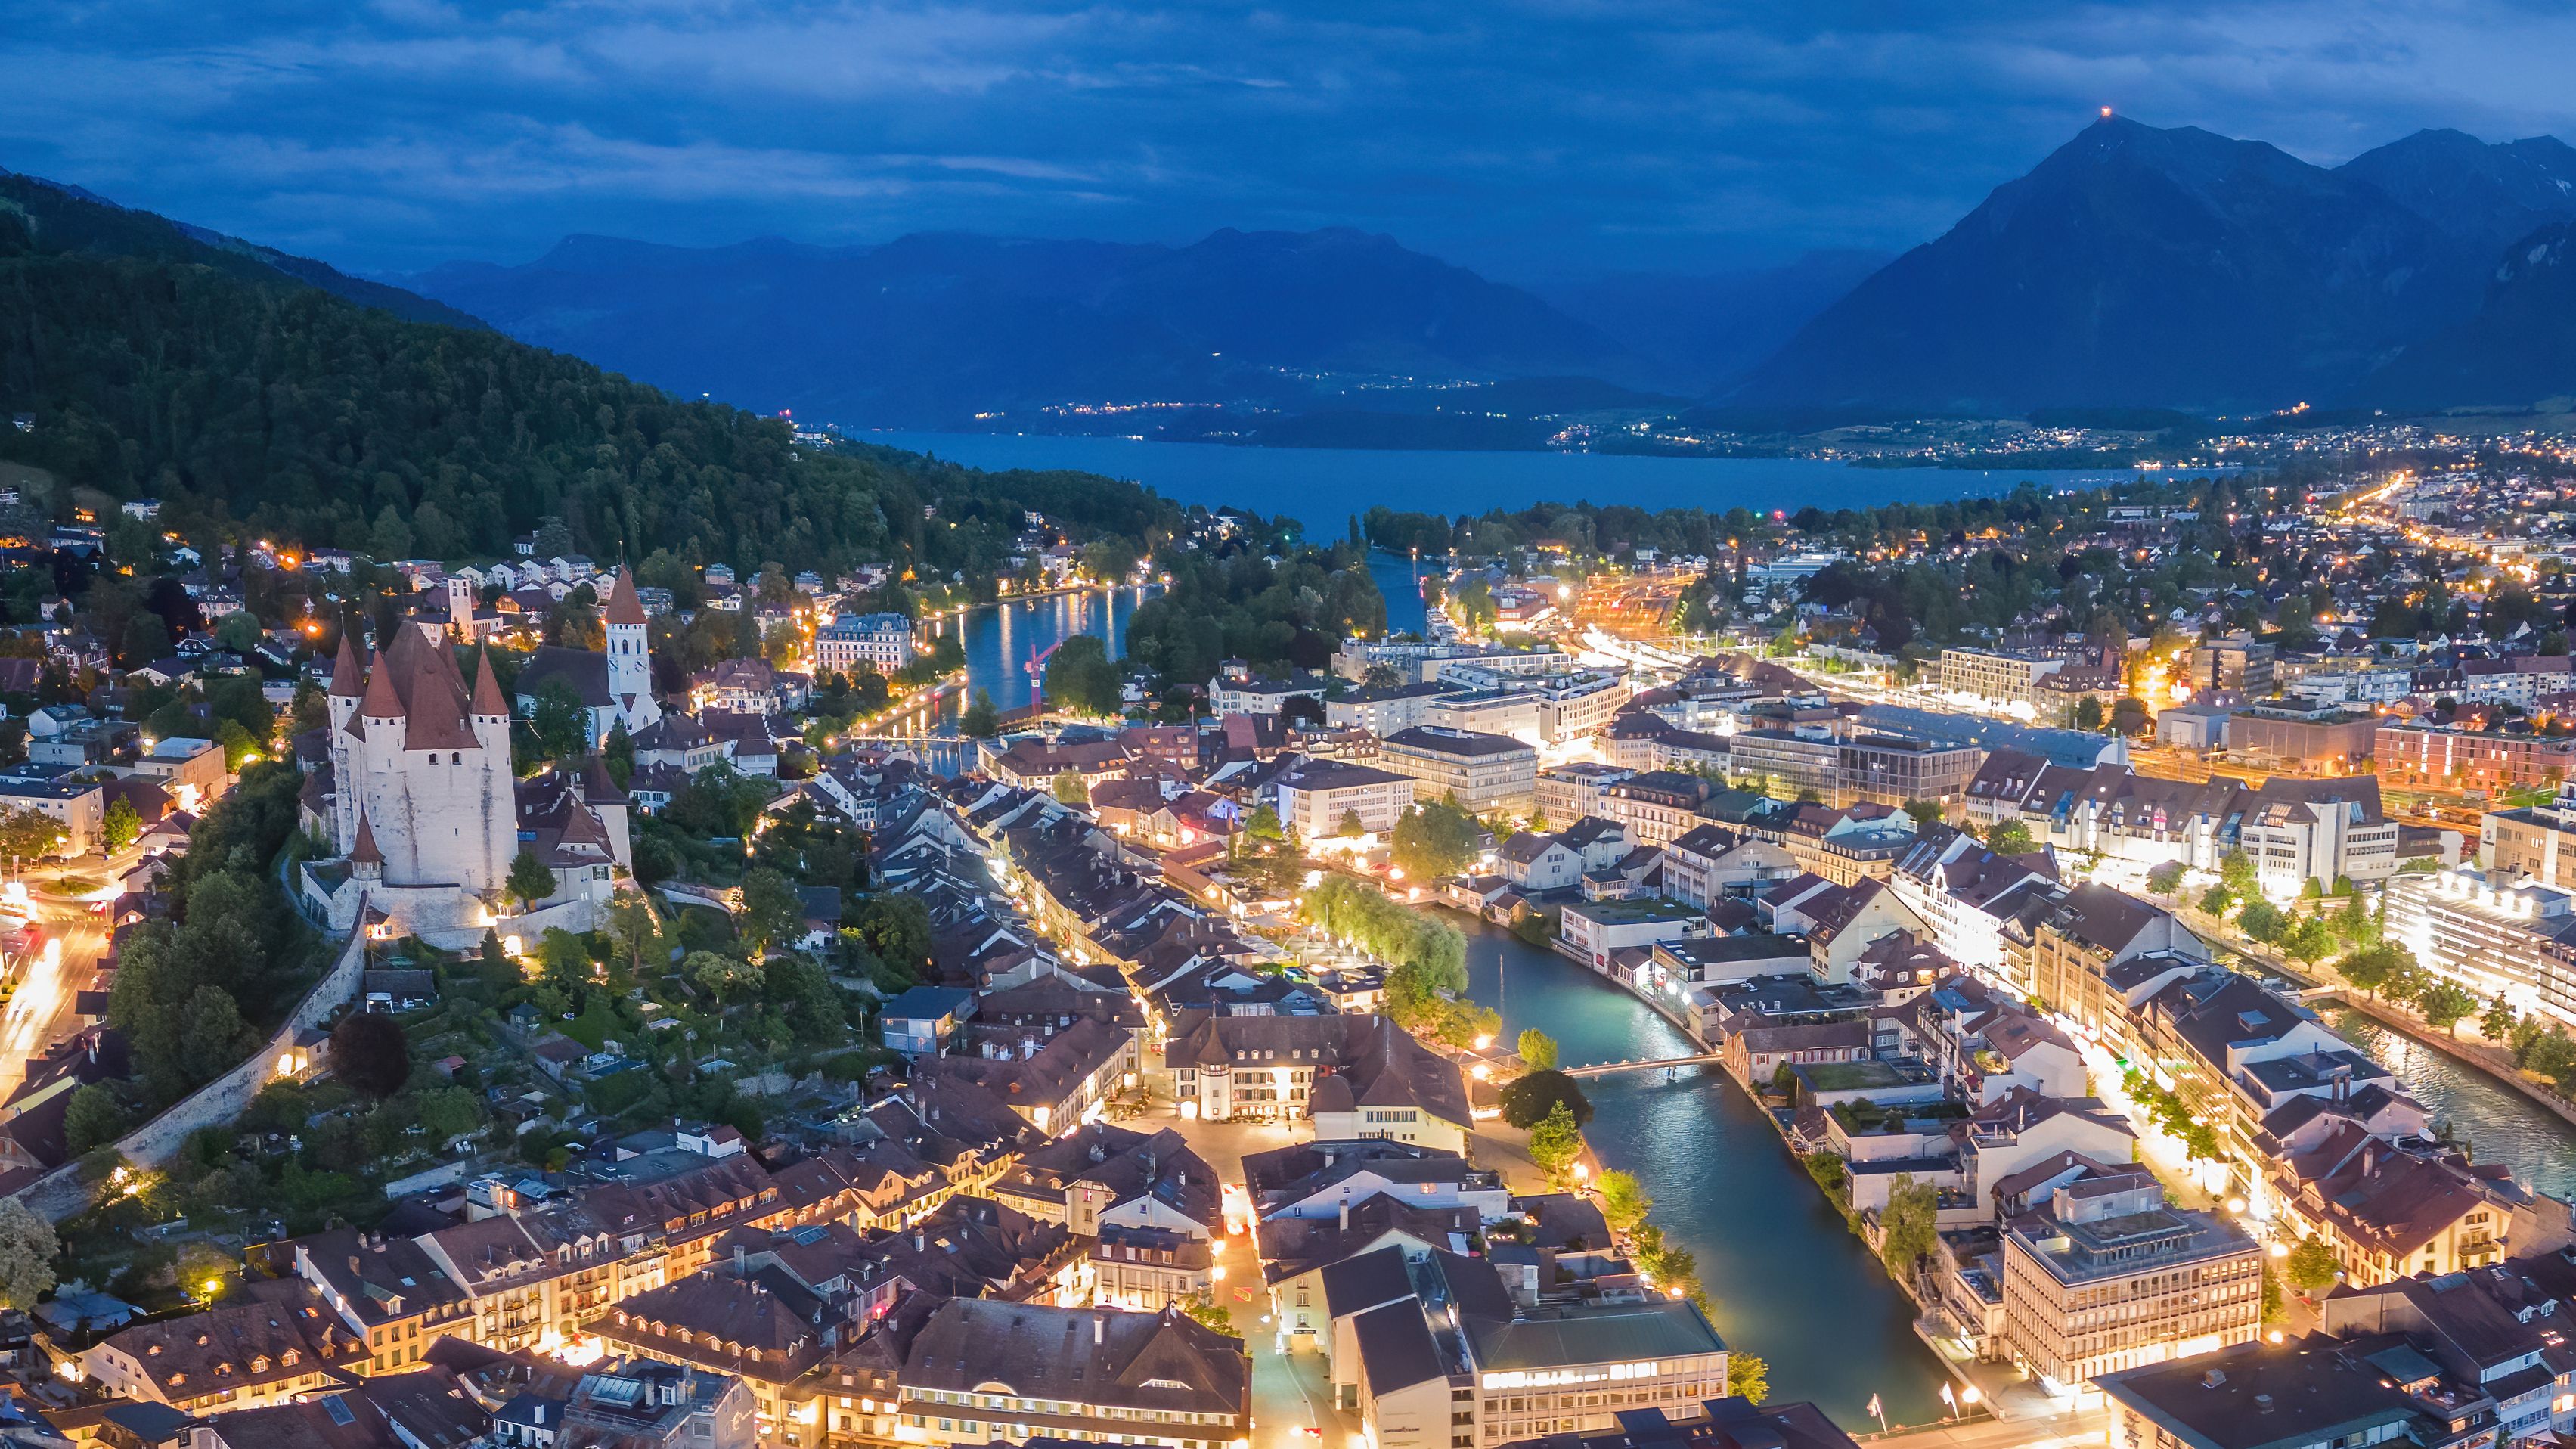 Aerial view of the old town of Thun at night, with Lake Thun and the Bernese Alps in the background.